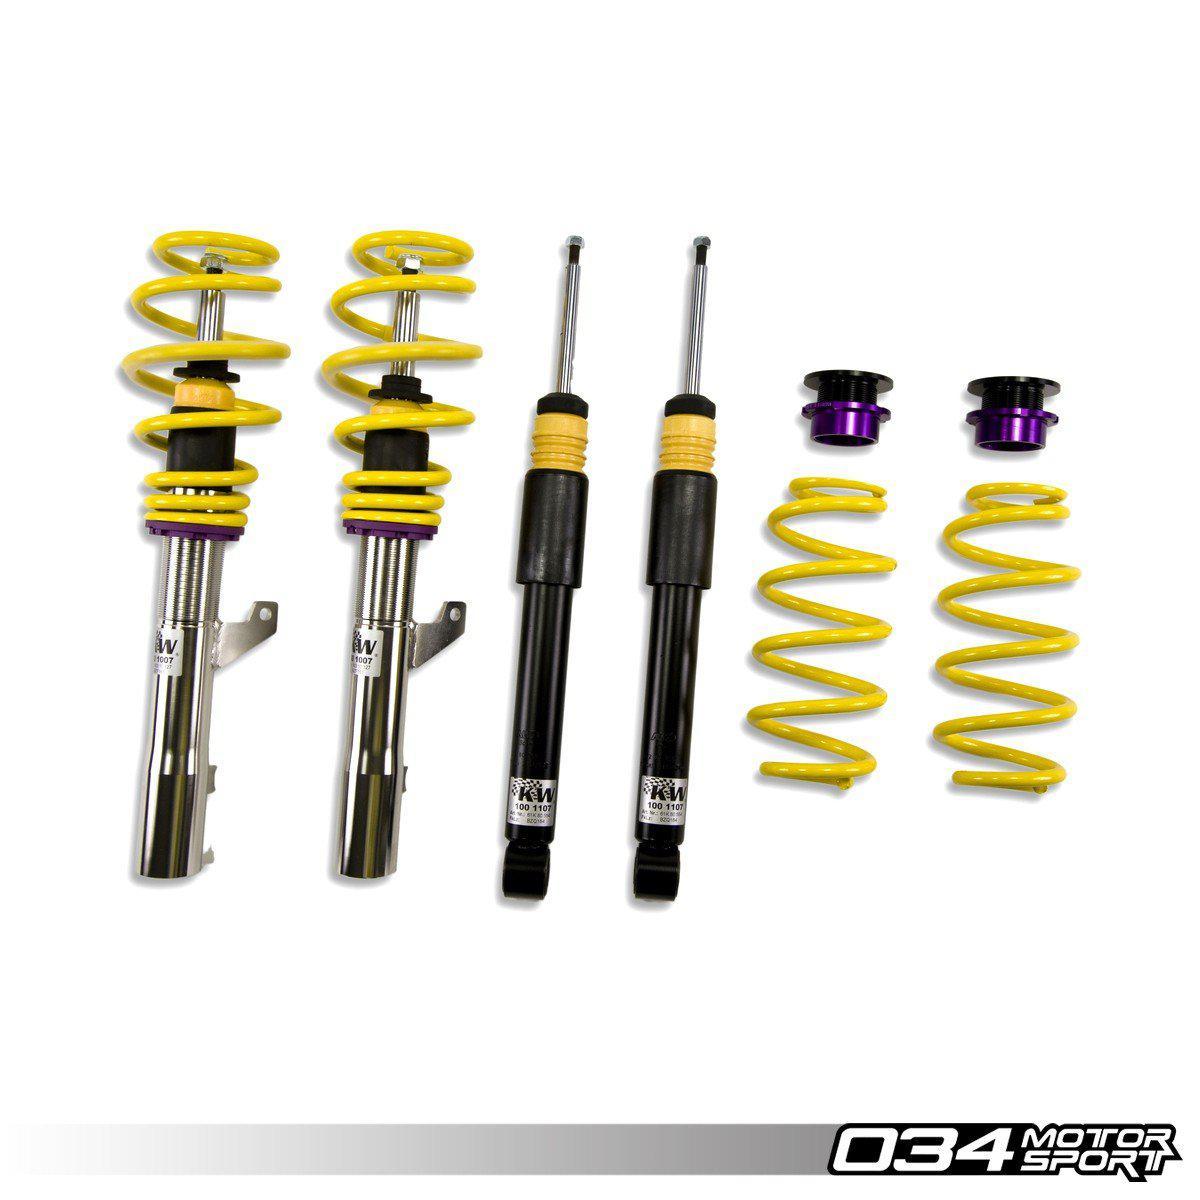 KW Variant 2 Coilover Suspension, C5 Audi A6/S6 Quattro-A Little Tuning Co